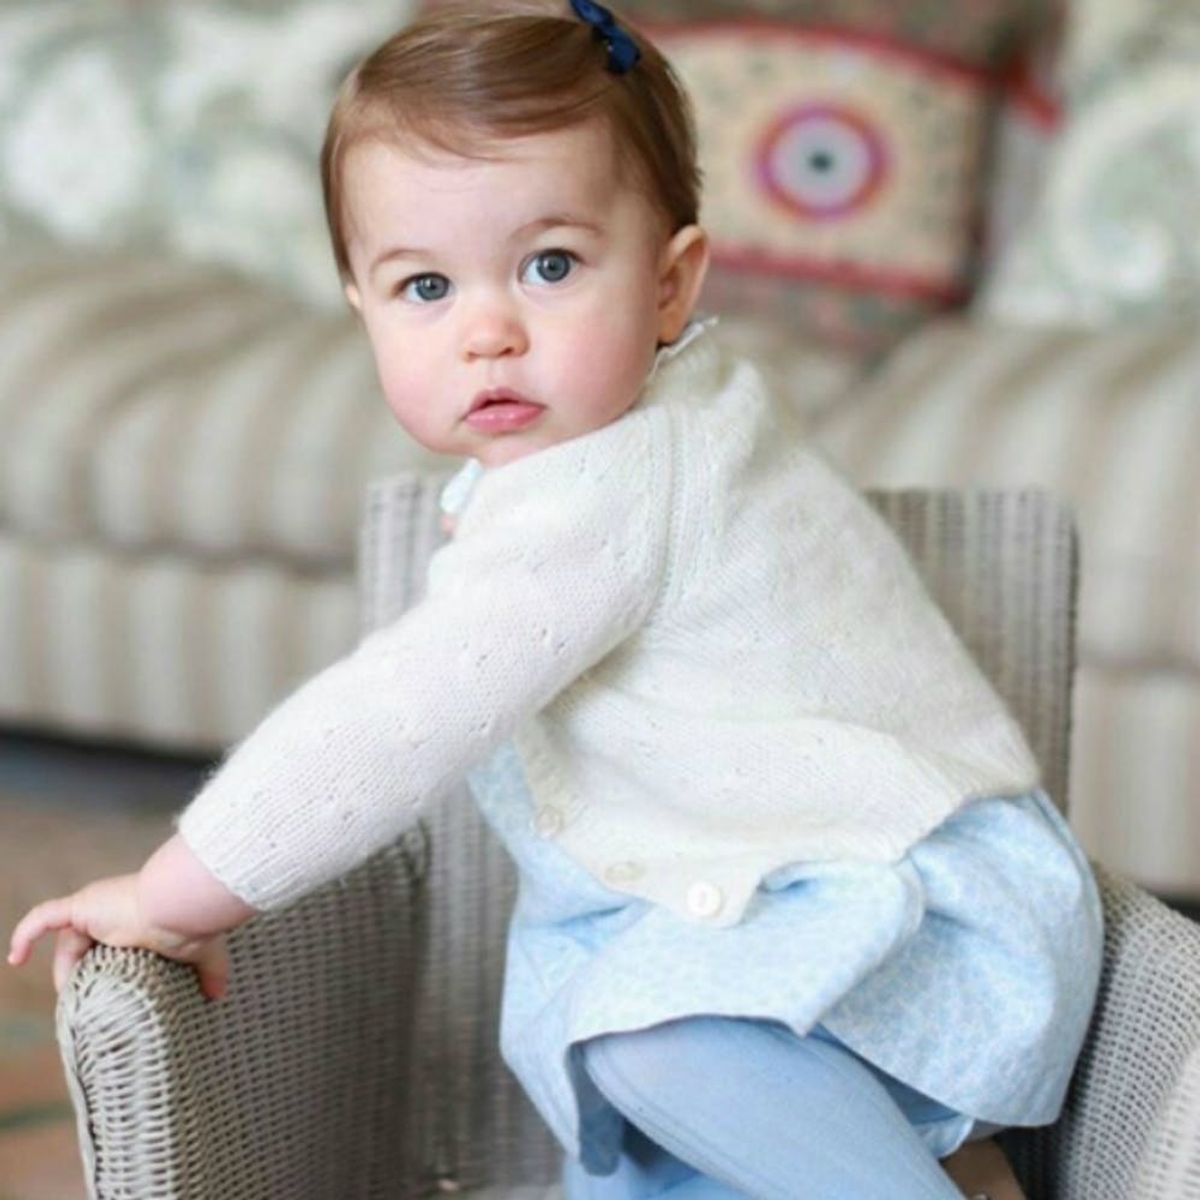 Princess Charlotte’s First B-Day Pics Will Make You Swoon